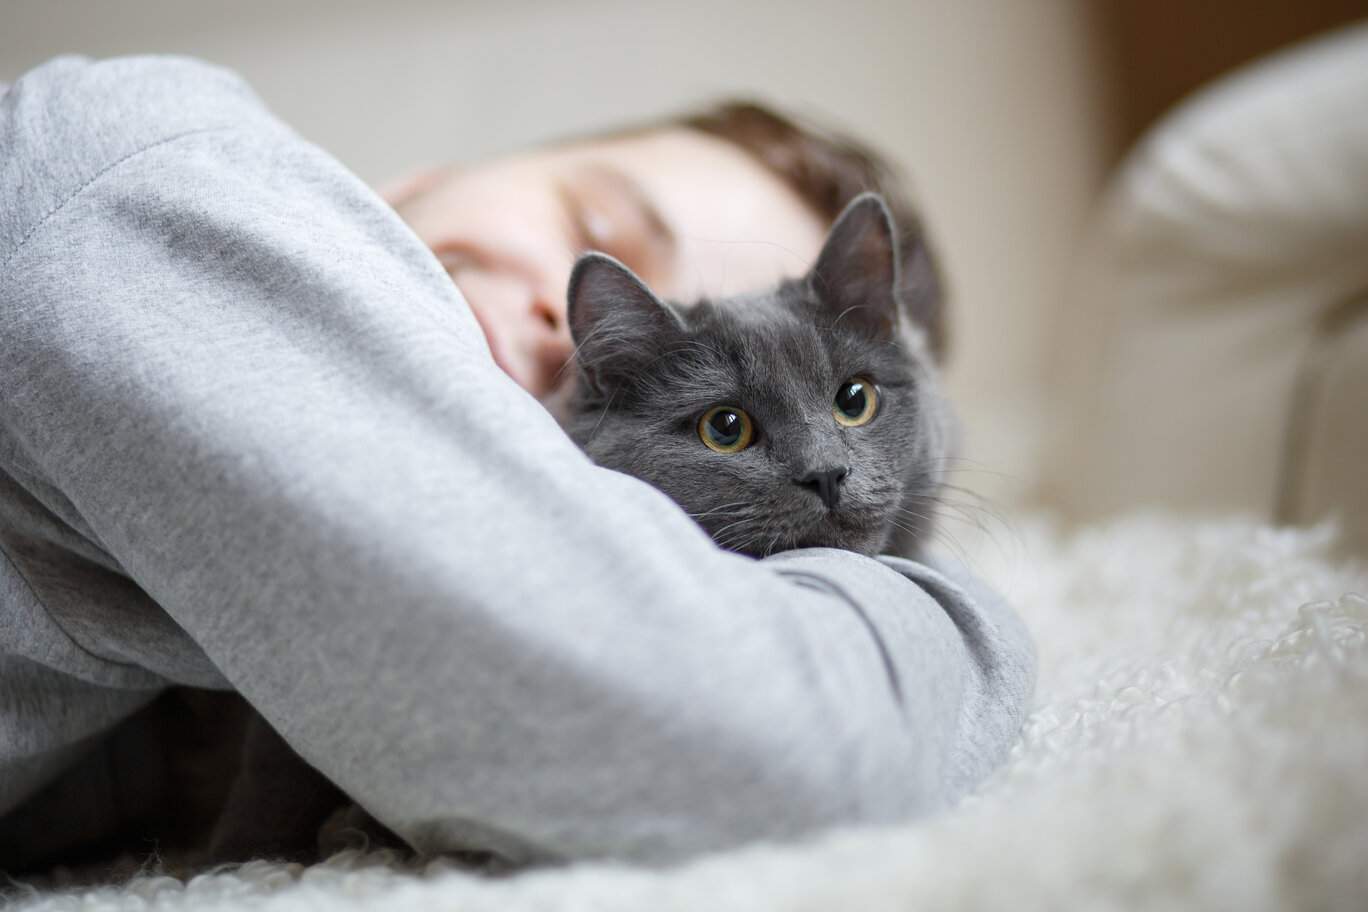 A heartwarming moment captured as a man embraces his cat lovingly while sitting on a bed, illustrating the strong bond and companionship between humans and their feline friends.